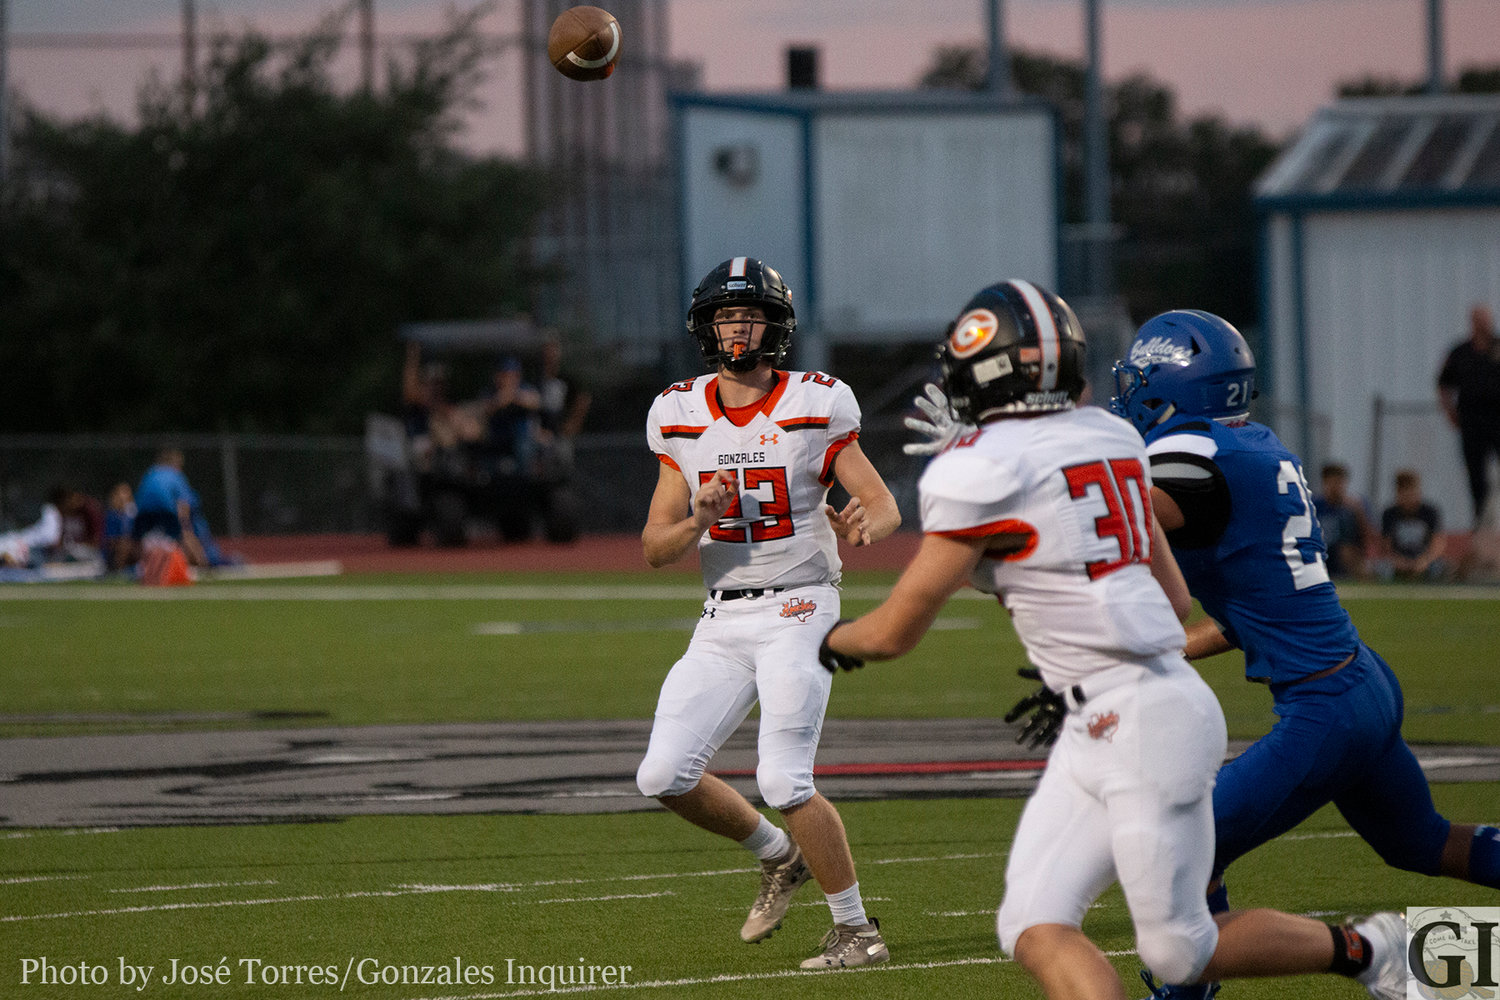 Quarterback Heath Henke (23) finds Jared Cook (30) off a play-action pass early in the first half. The Apaches would win 27-25 against the Yoakum Bulldogs.